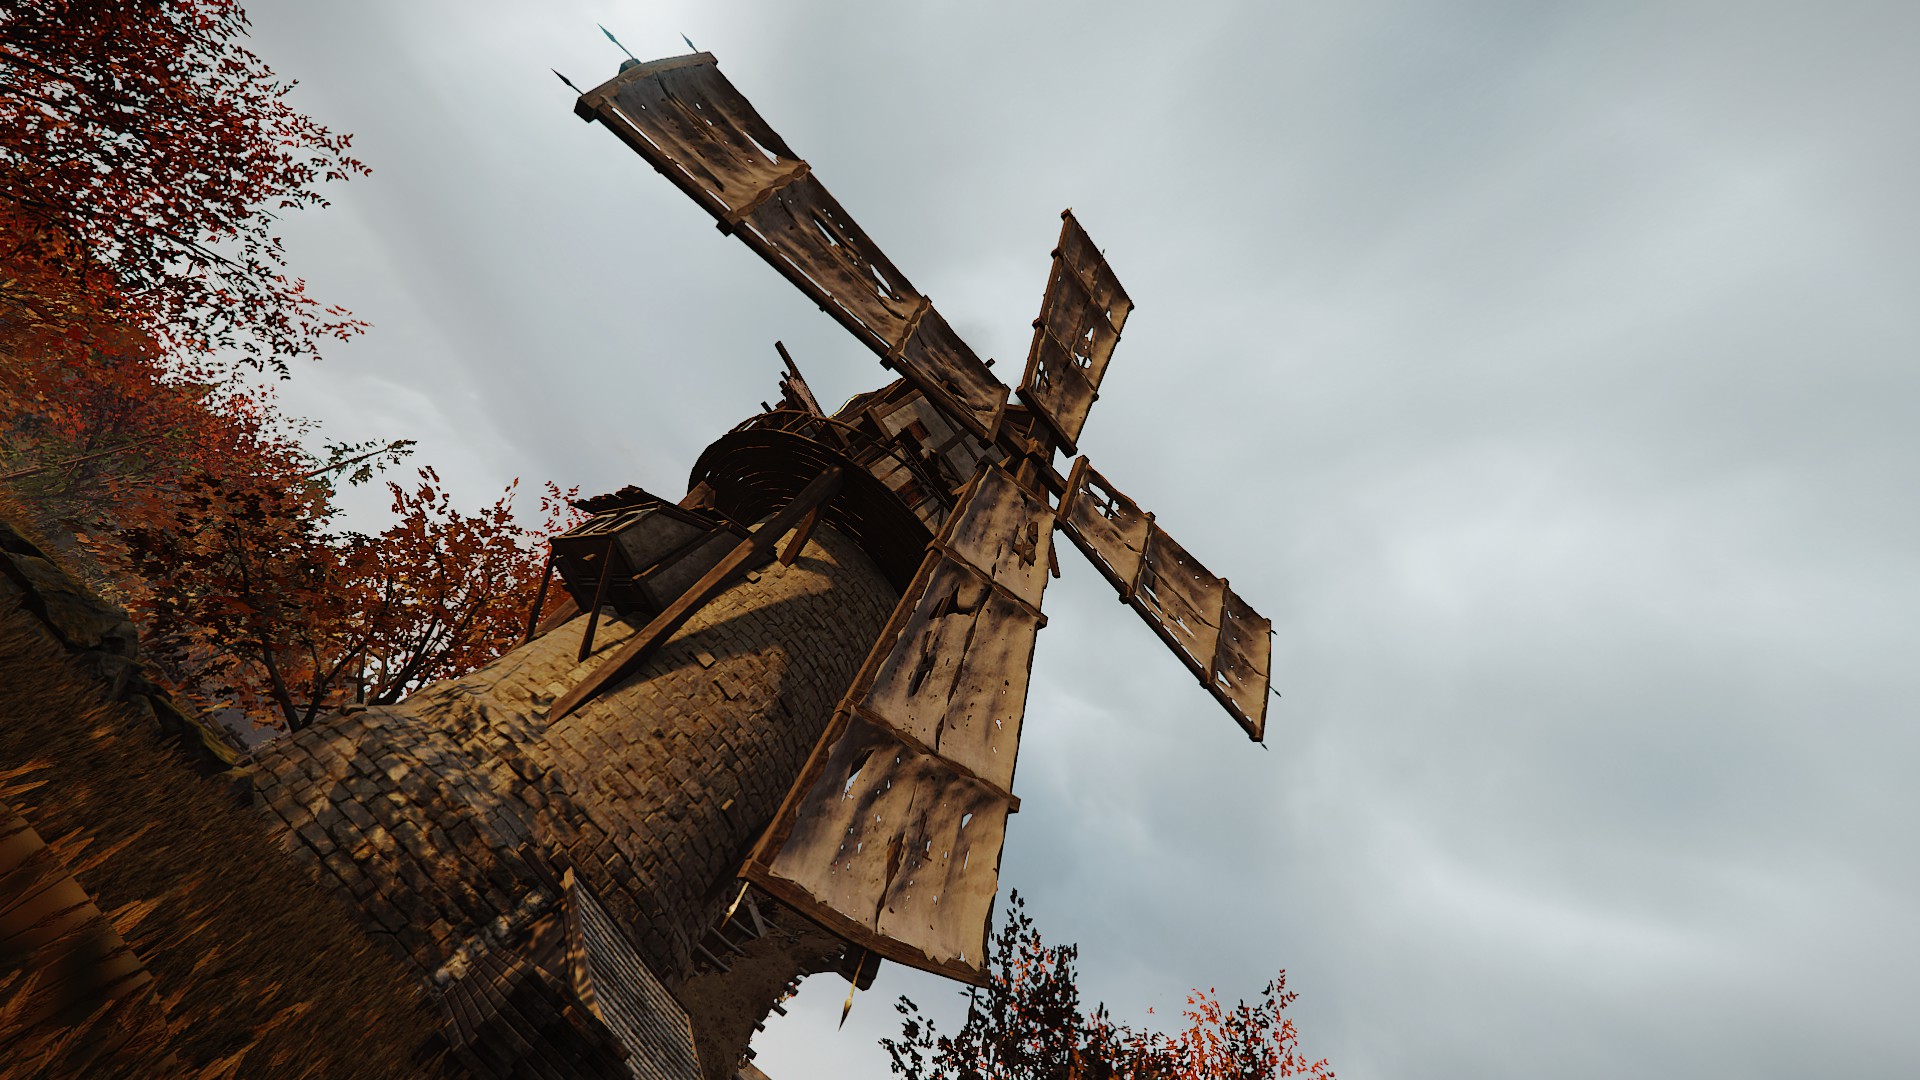 Vermintide 2s Photomode mod lets you pose your own Warhammer art